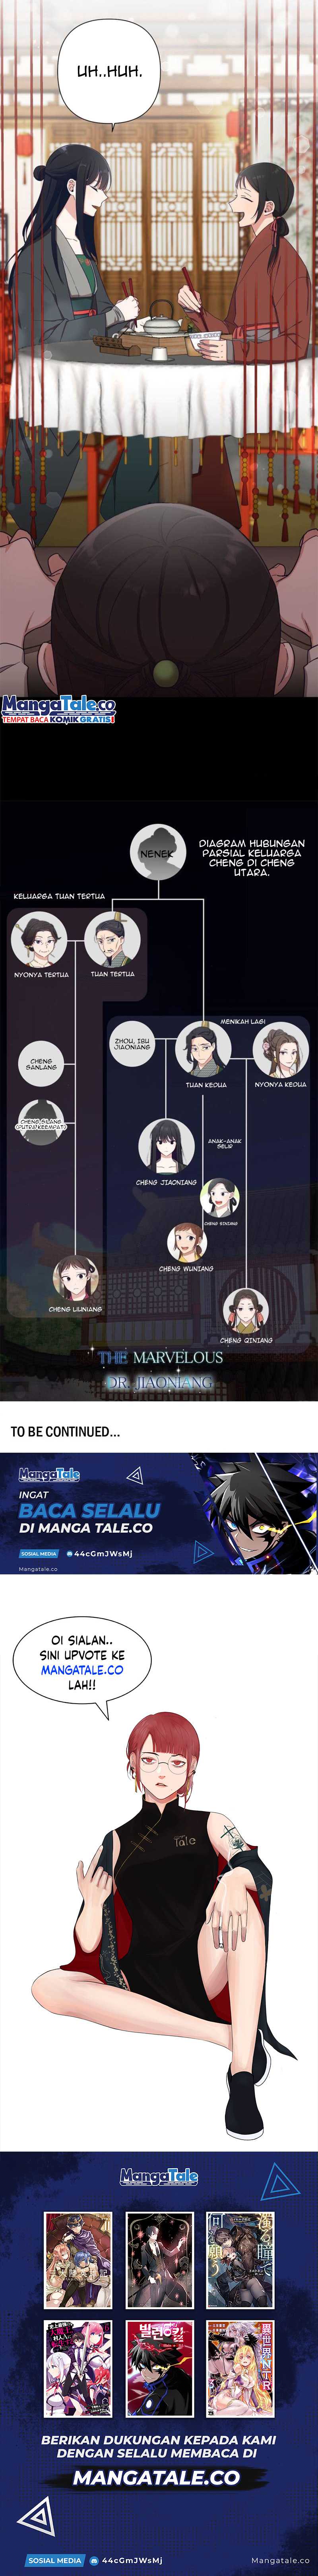 The Marvelous Dr Jiaoniang Chapter 07